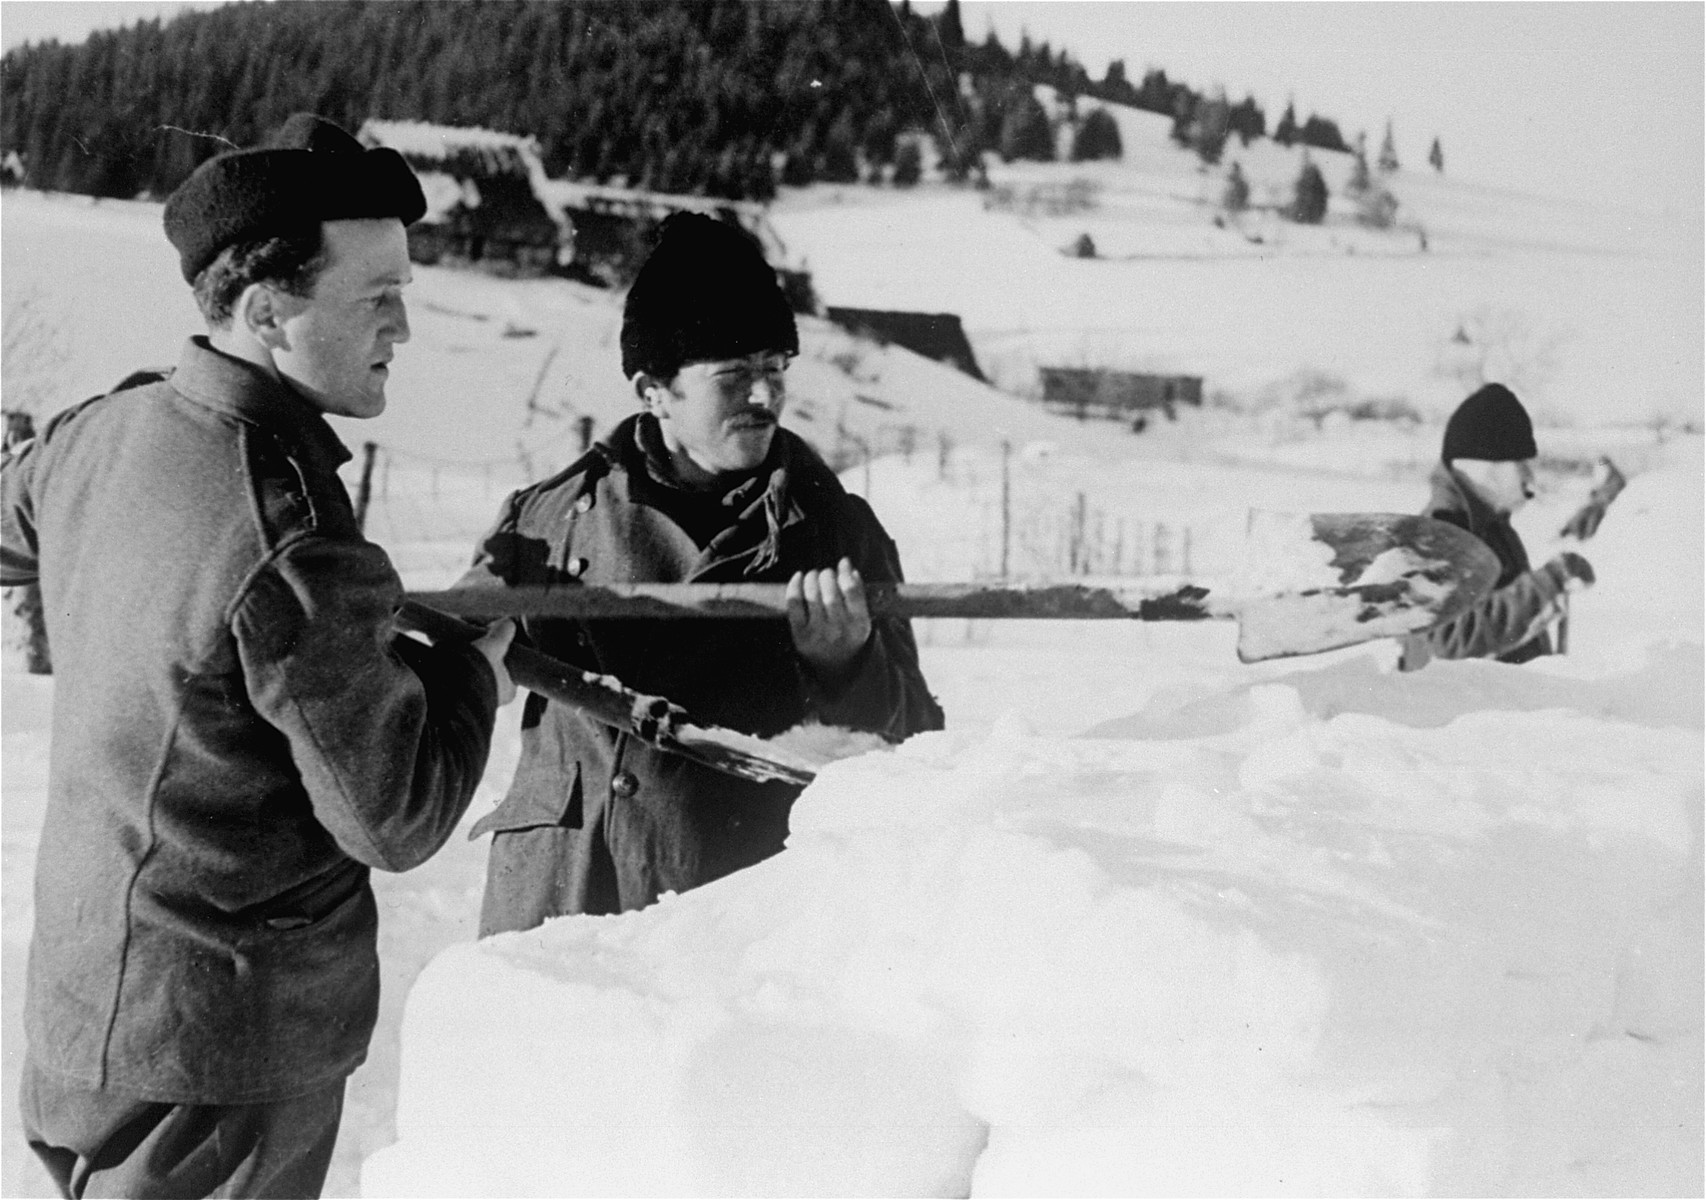 Jewish conscripts in Company 108/57 of the Hungarian Labor Service at forced labor clearing snow from a road.  These men are constructing a barricade against drifting snow.